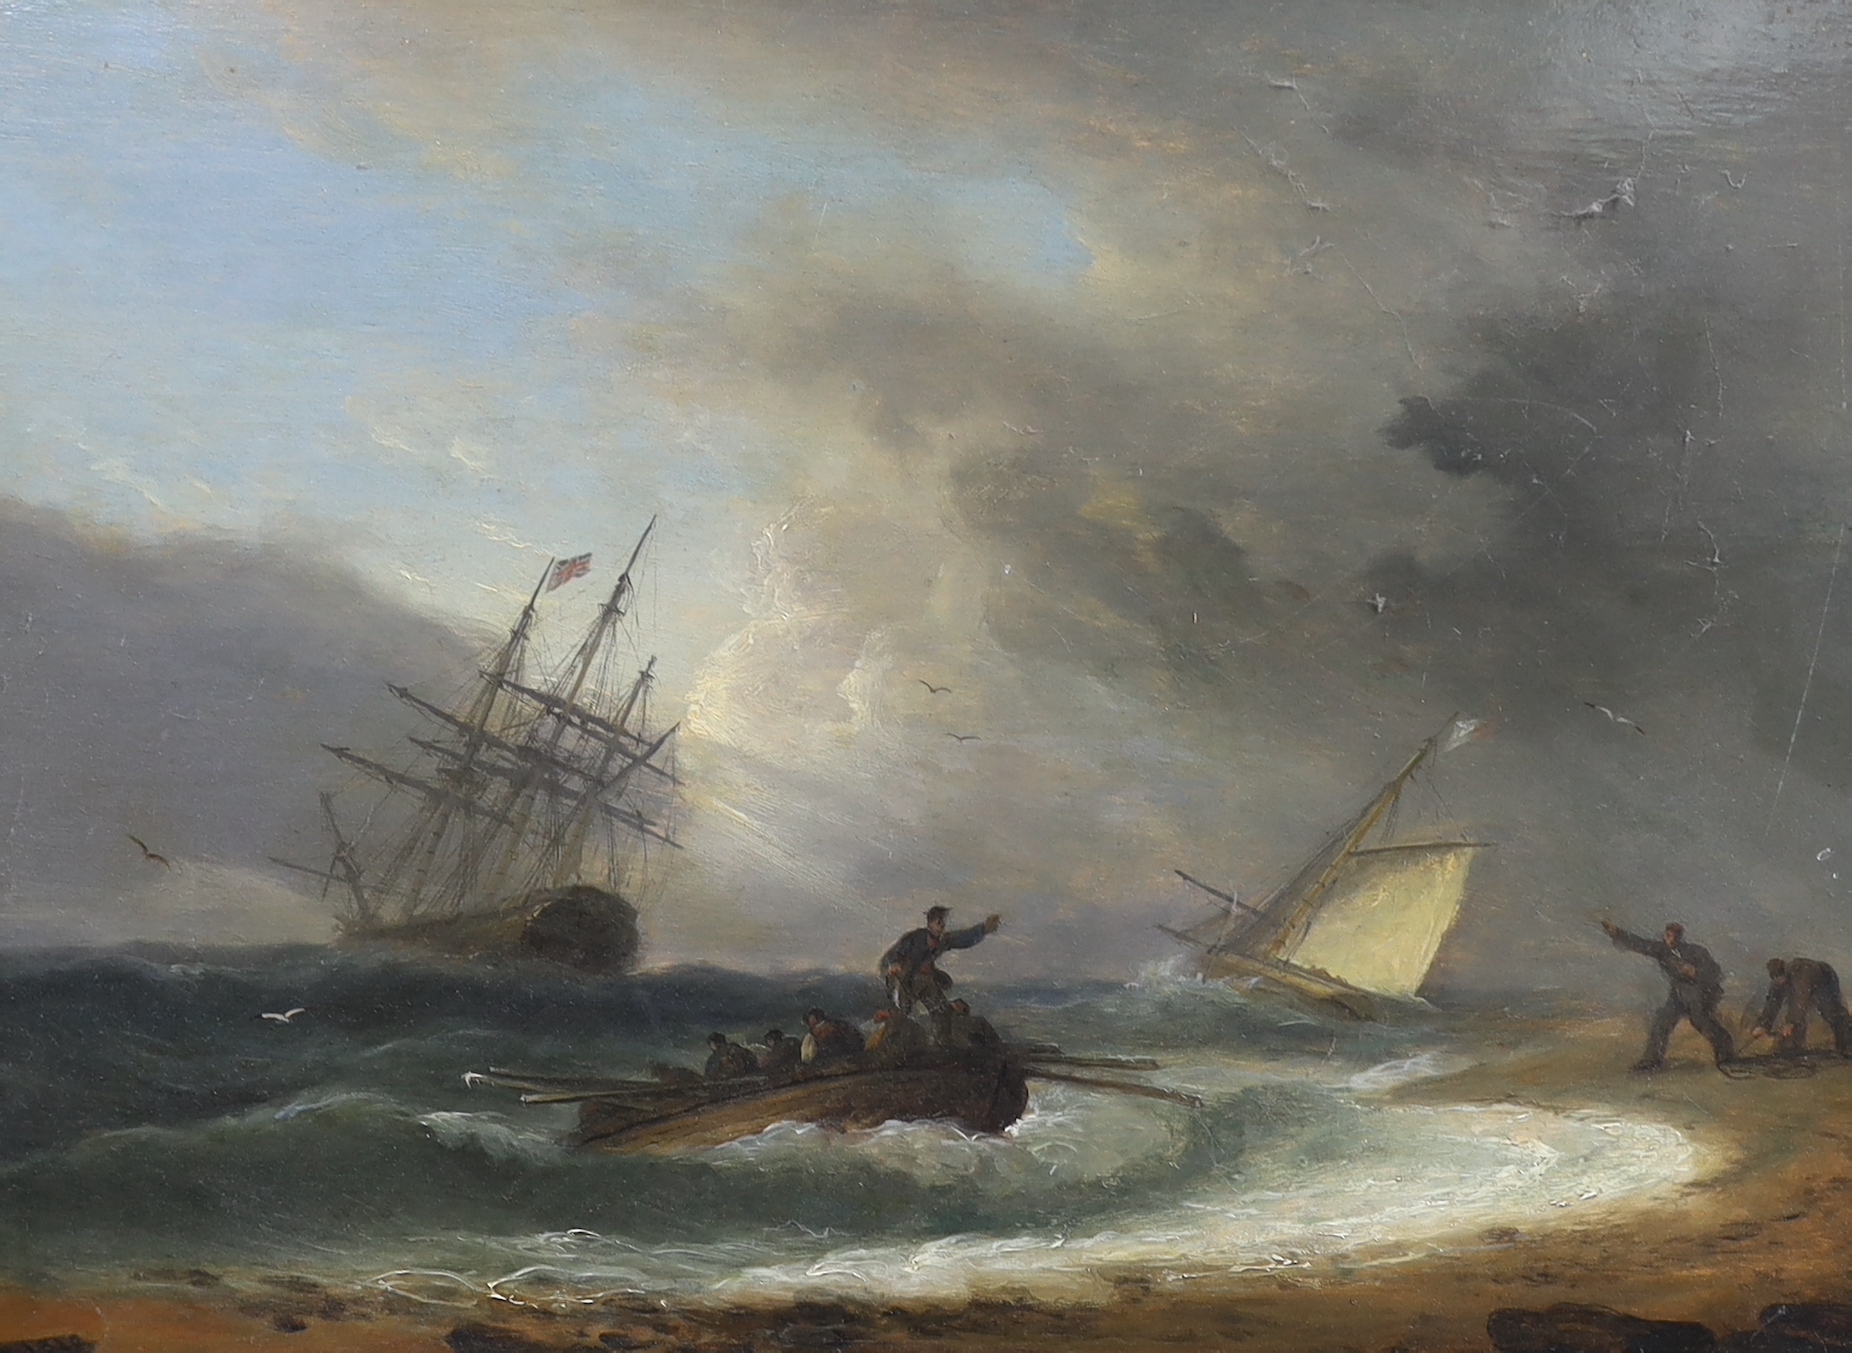 Thomas Luny (British, 1759-1837), Shipping in distress along the shoreline, oil on wooden panel, 29 x 39cm